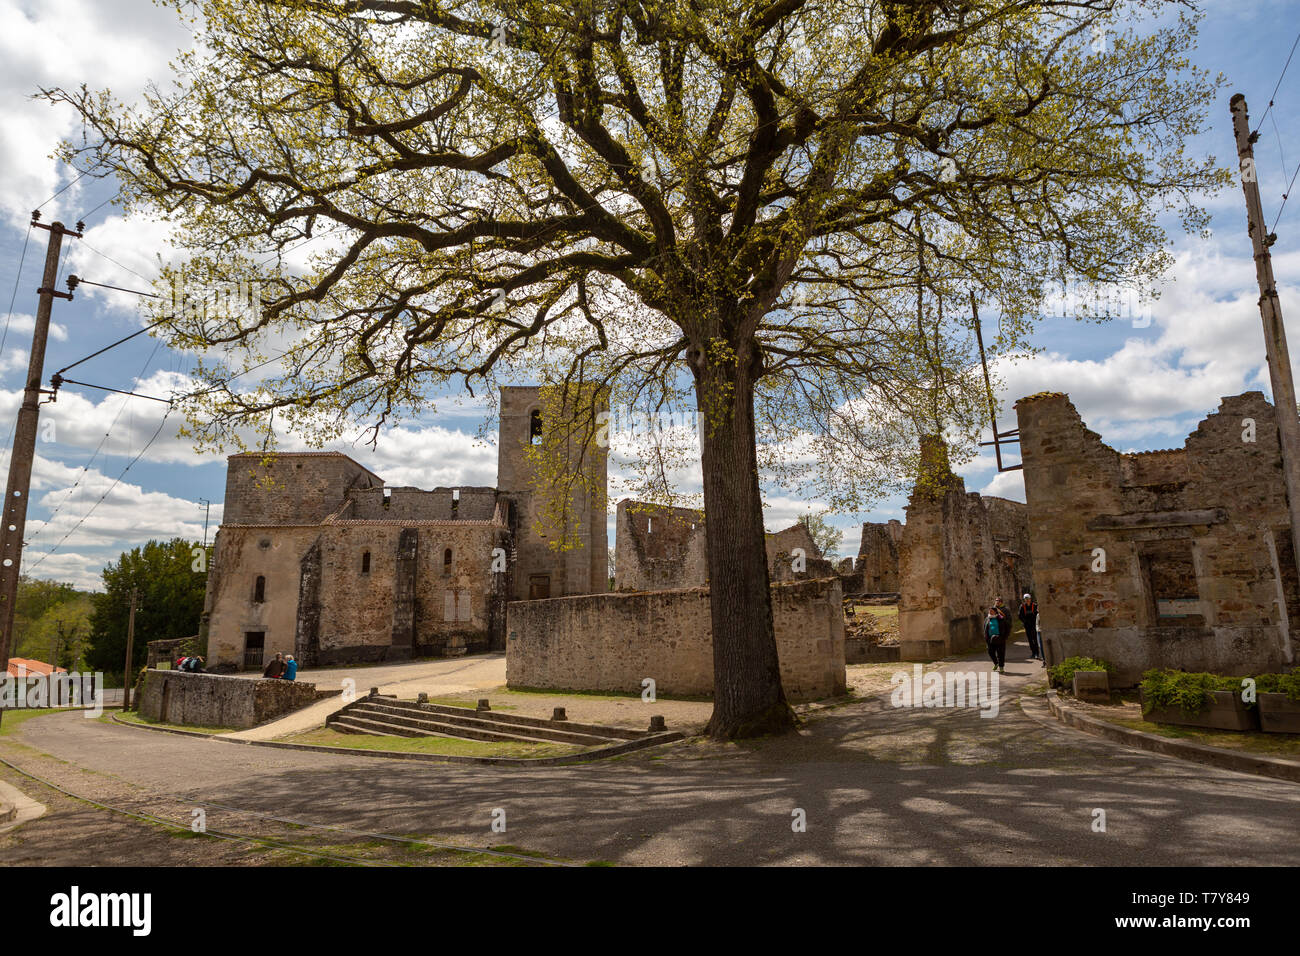 Oradour-sur-Glane, France - April 29, 2019: The ruins of the village and the church, after the massacre by the german nazi's in 1944 that destroyed it Stock Photo